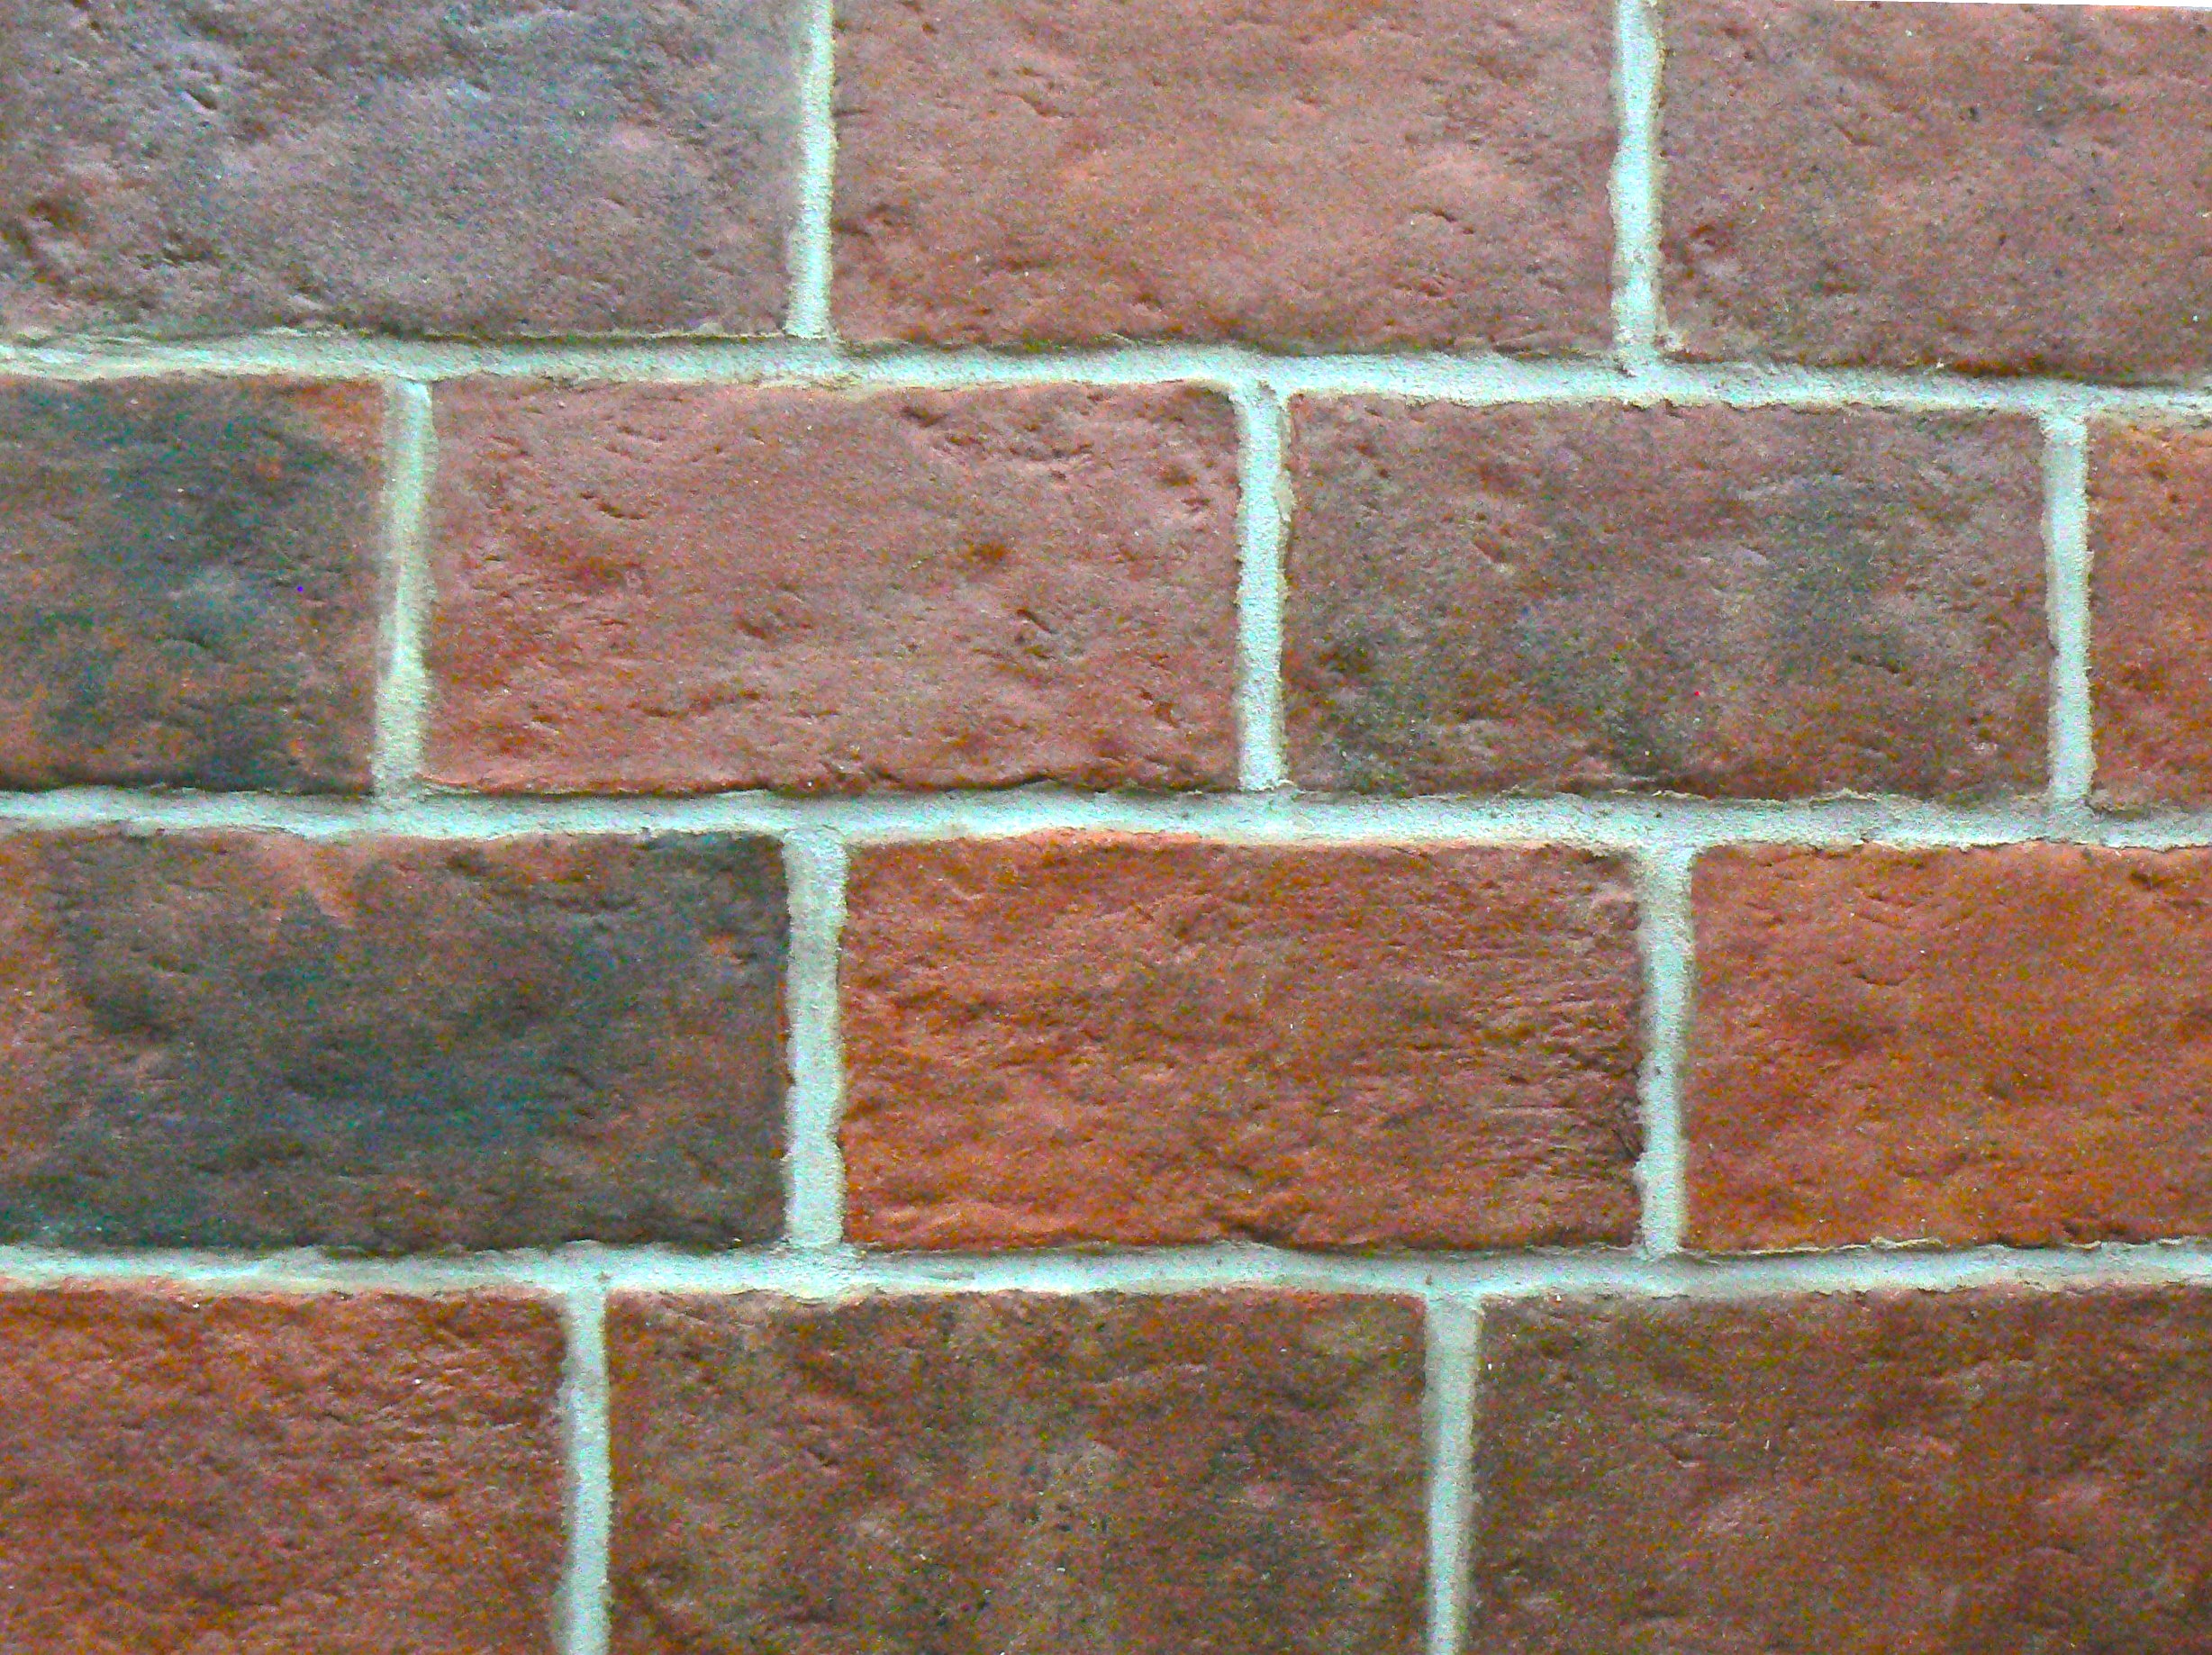 Traditional Antique 48 Brick Tile News From Inglenook Tile Effy Moom Free Coloring Picture wallpaper give a chance to color on the wall without getting in trouble! Fill the walls of your home or office with stress-relieving [effymoom.blogspot.com]